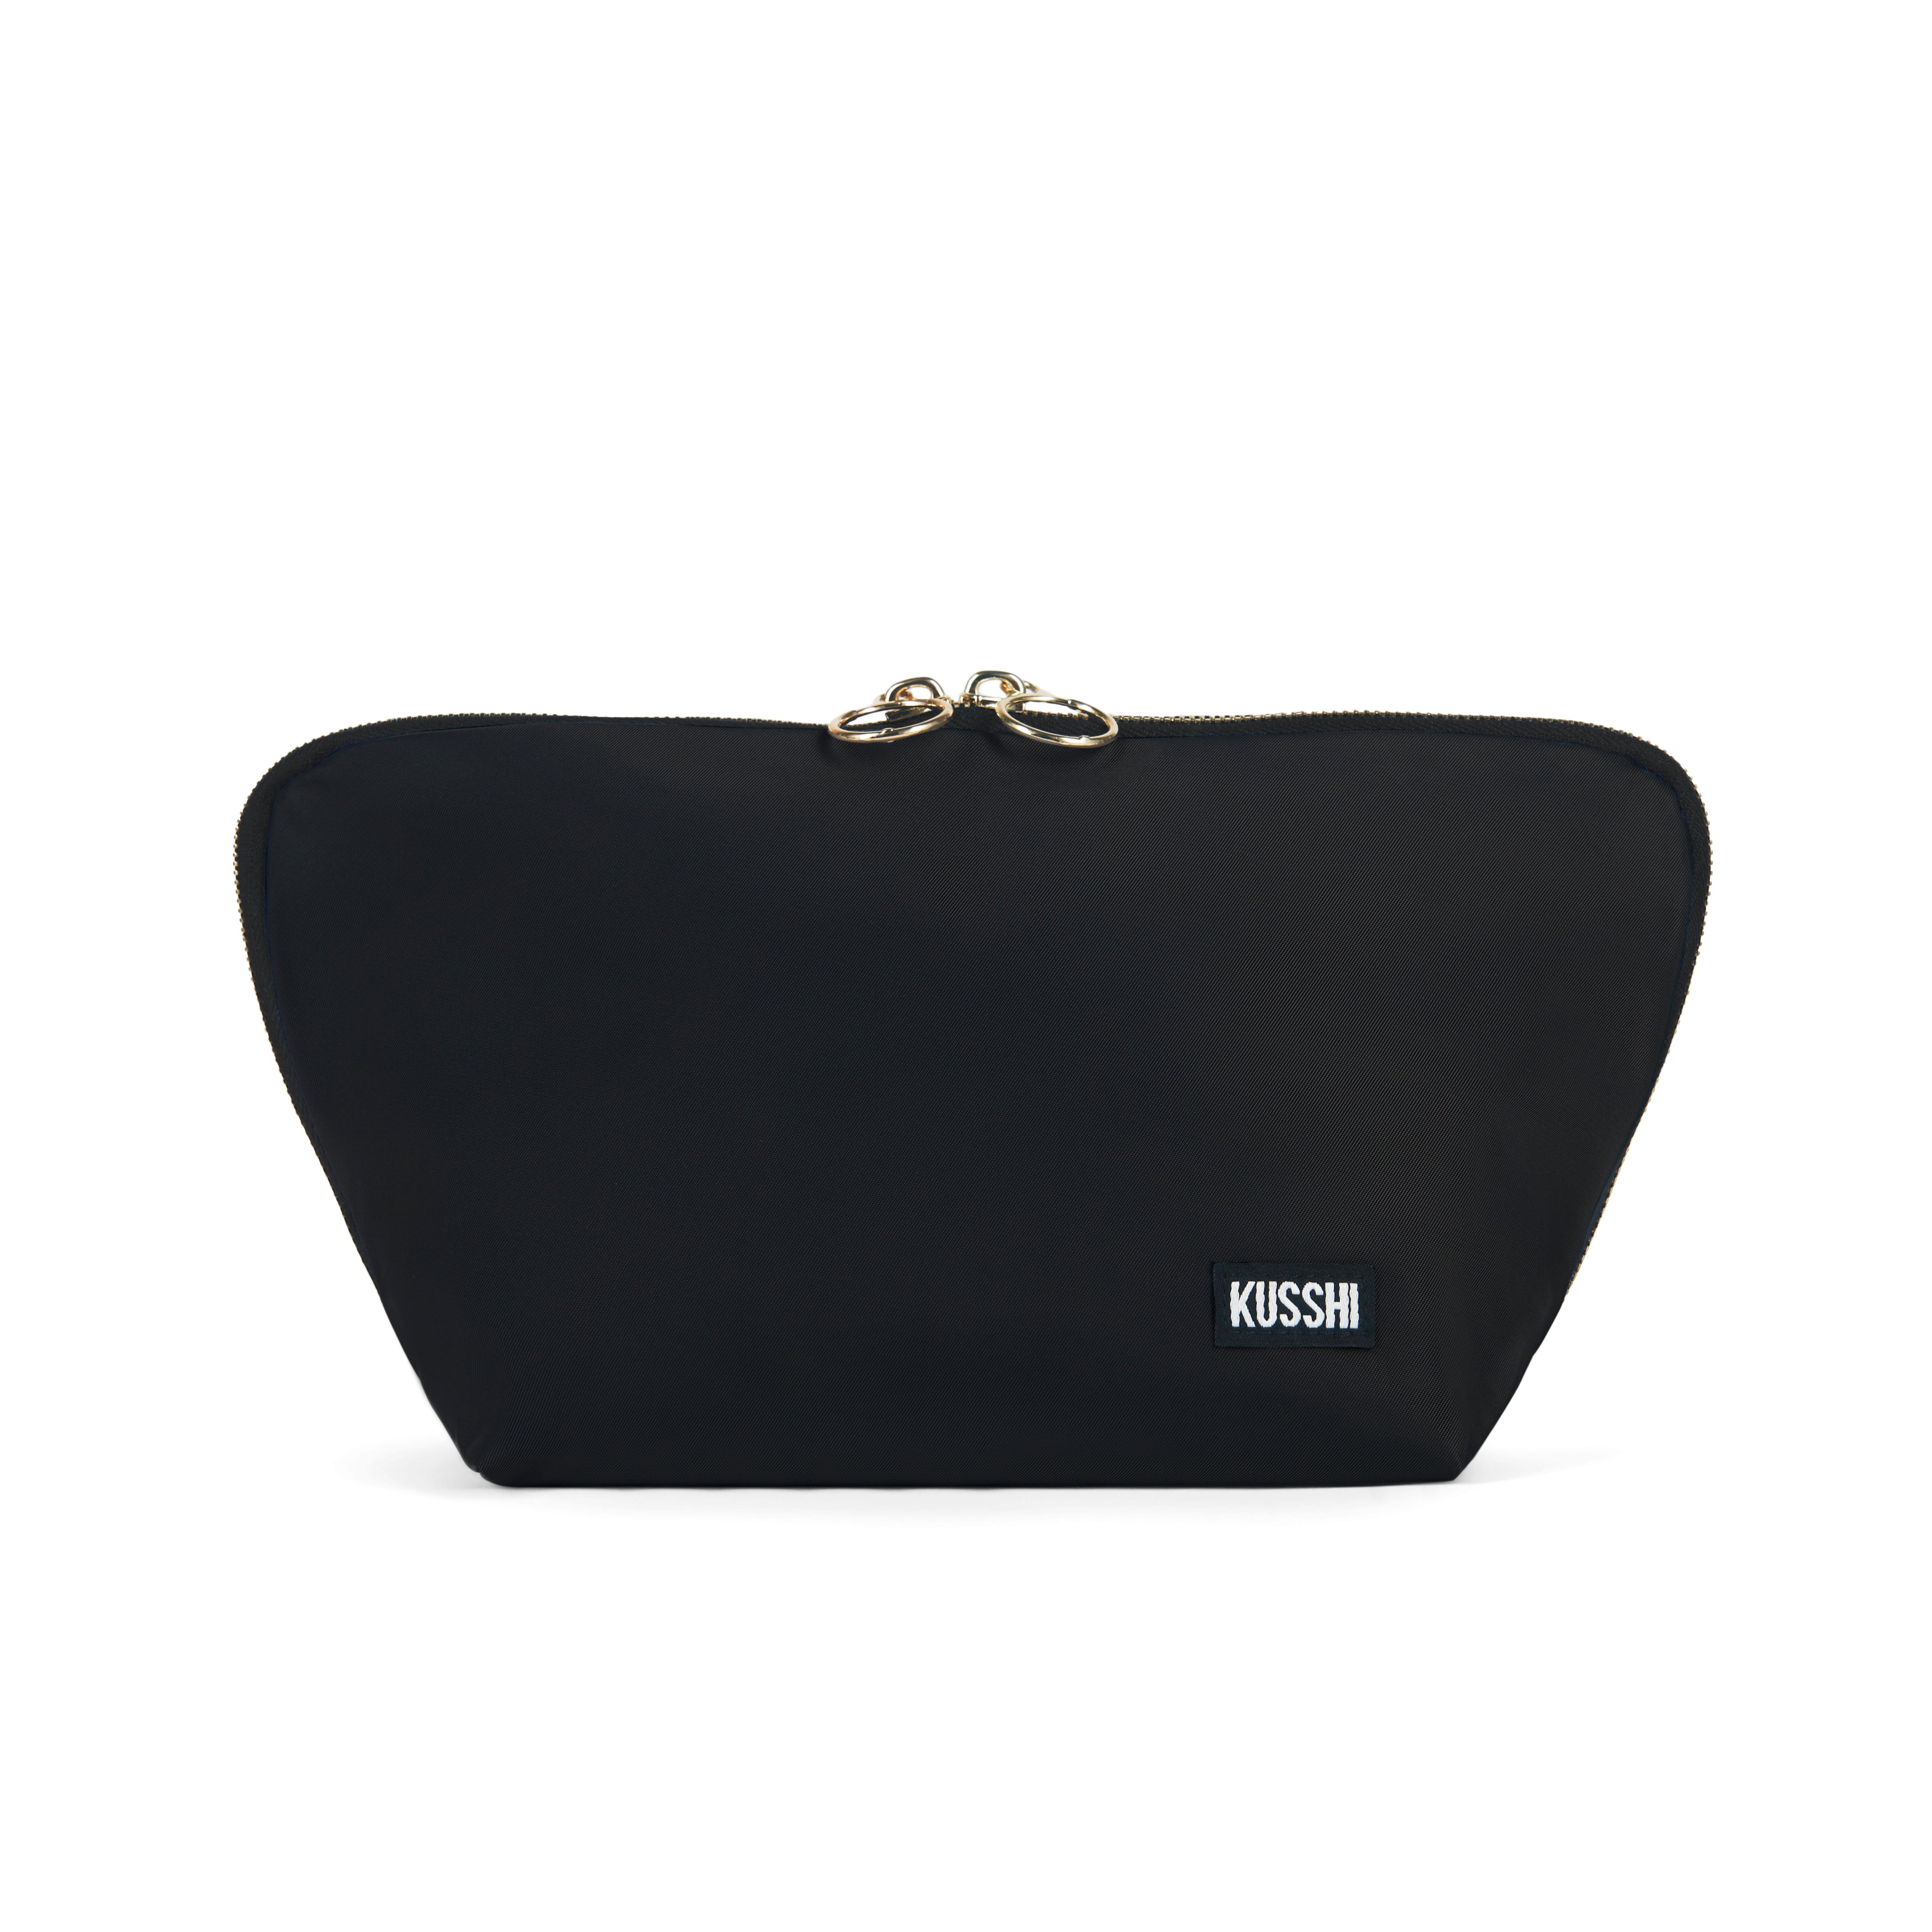 memories spur chance Signature Black Makeup Bag by Kusshi | Pick Your Color and Size - KUSSHI